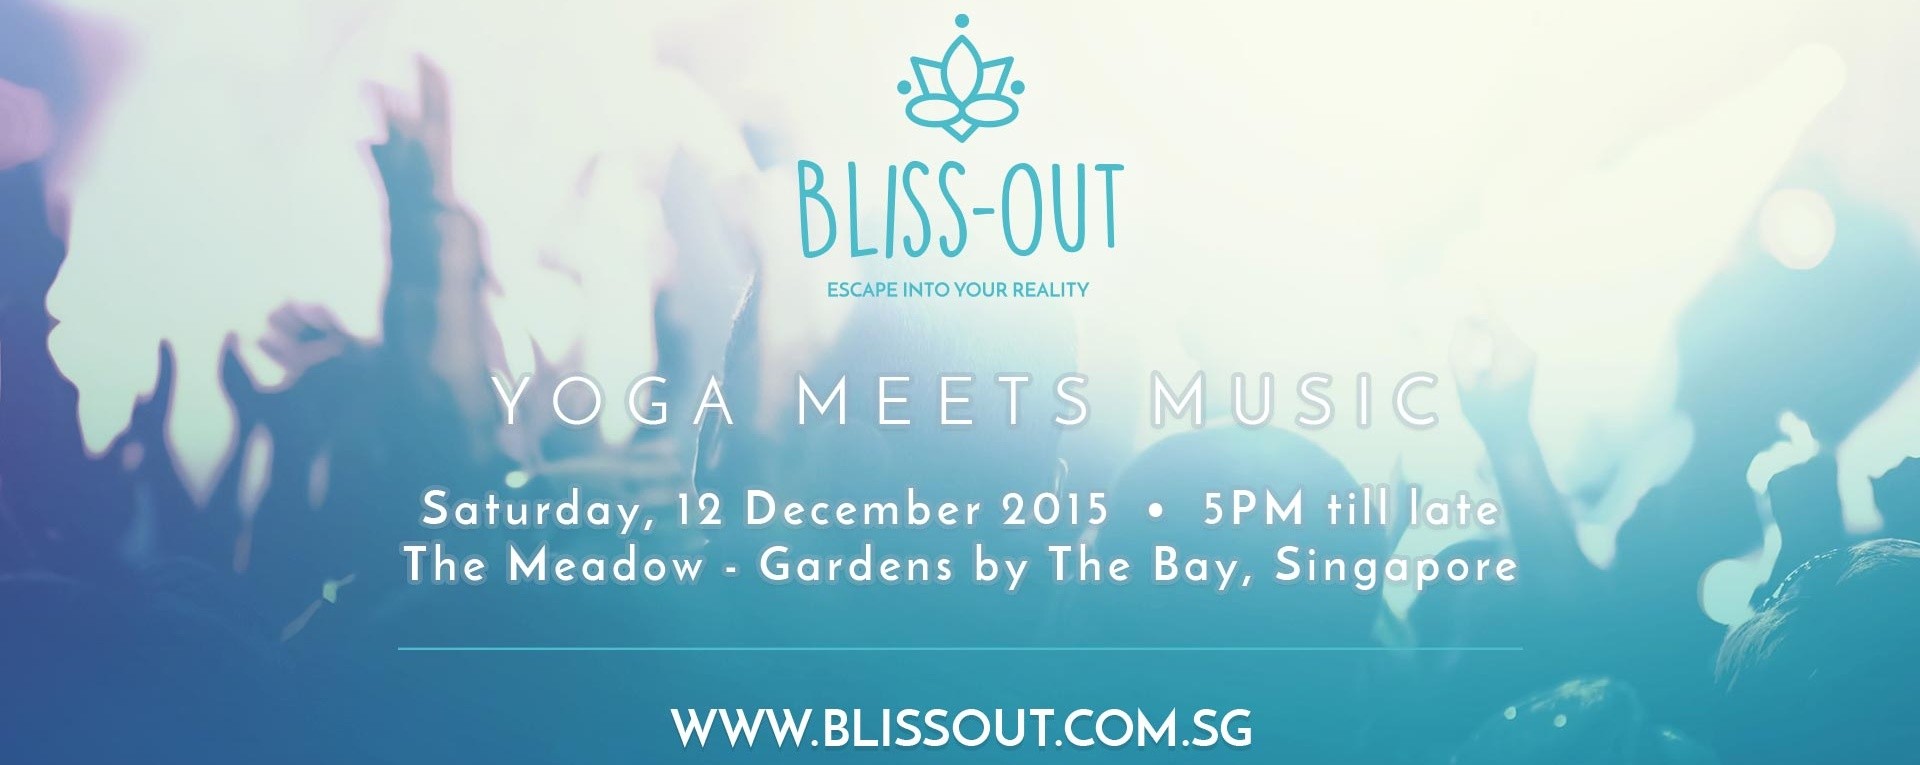 Bliss Out 2015